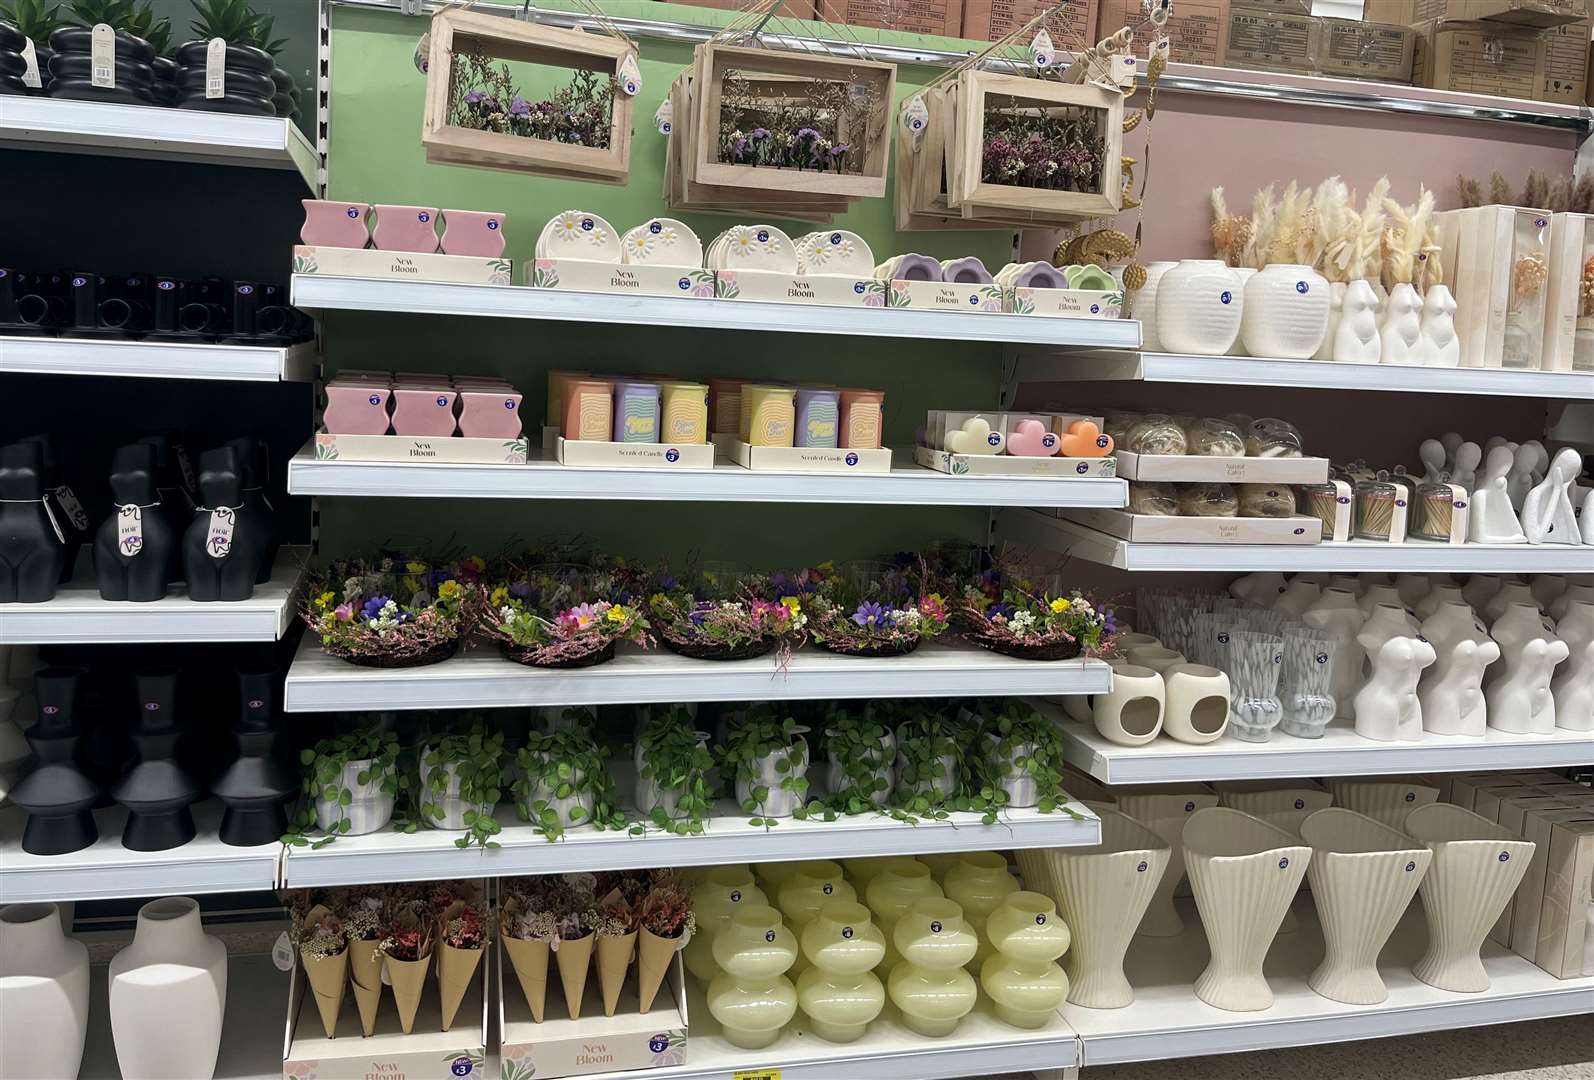 Homeware and decorations can be found in middle aisles